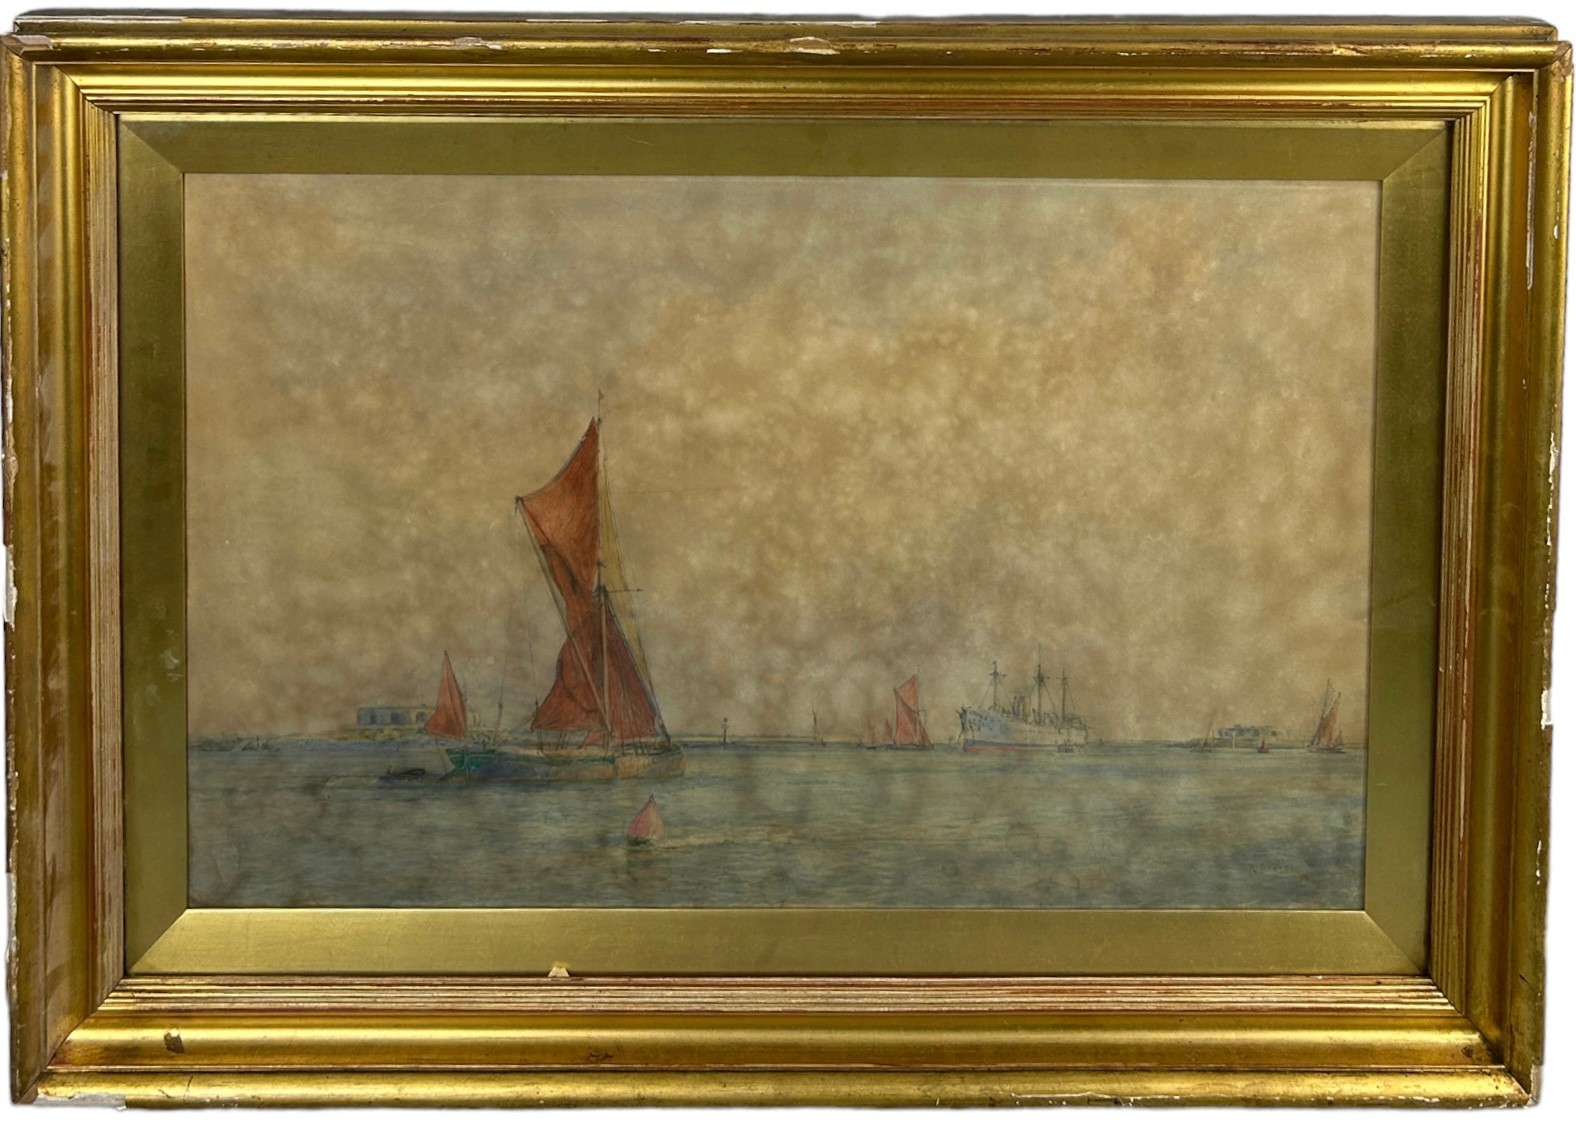 HENRY BRANSTON FREER (1876-1947) A LARGE WATERCOLOUR ON PAPER PAINTING DEPICTING SHIPS IN THE